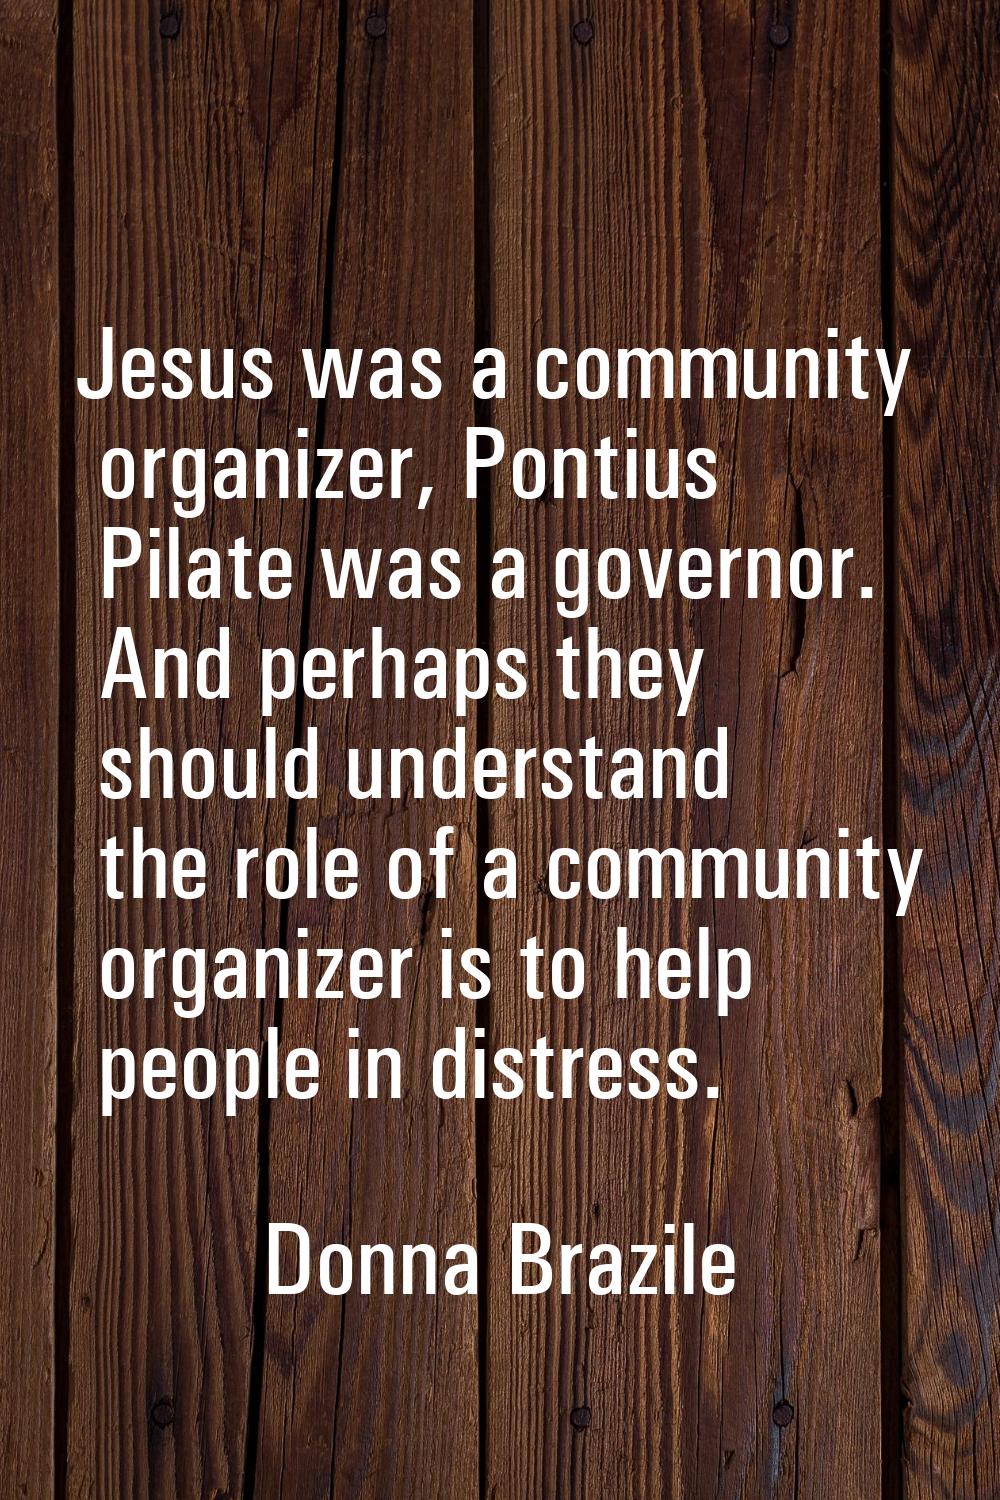 Jesus was a community organizer, Pontius Pilate was a governor. And perhaps they should understand 